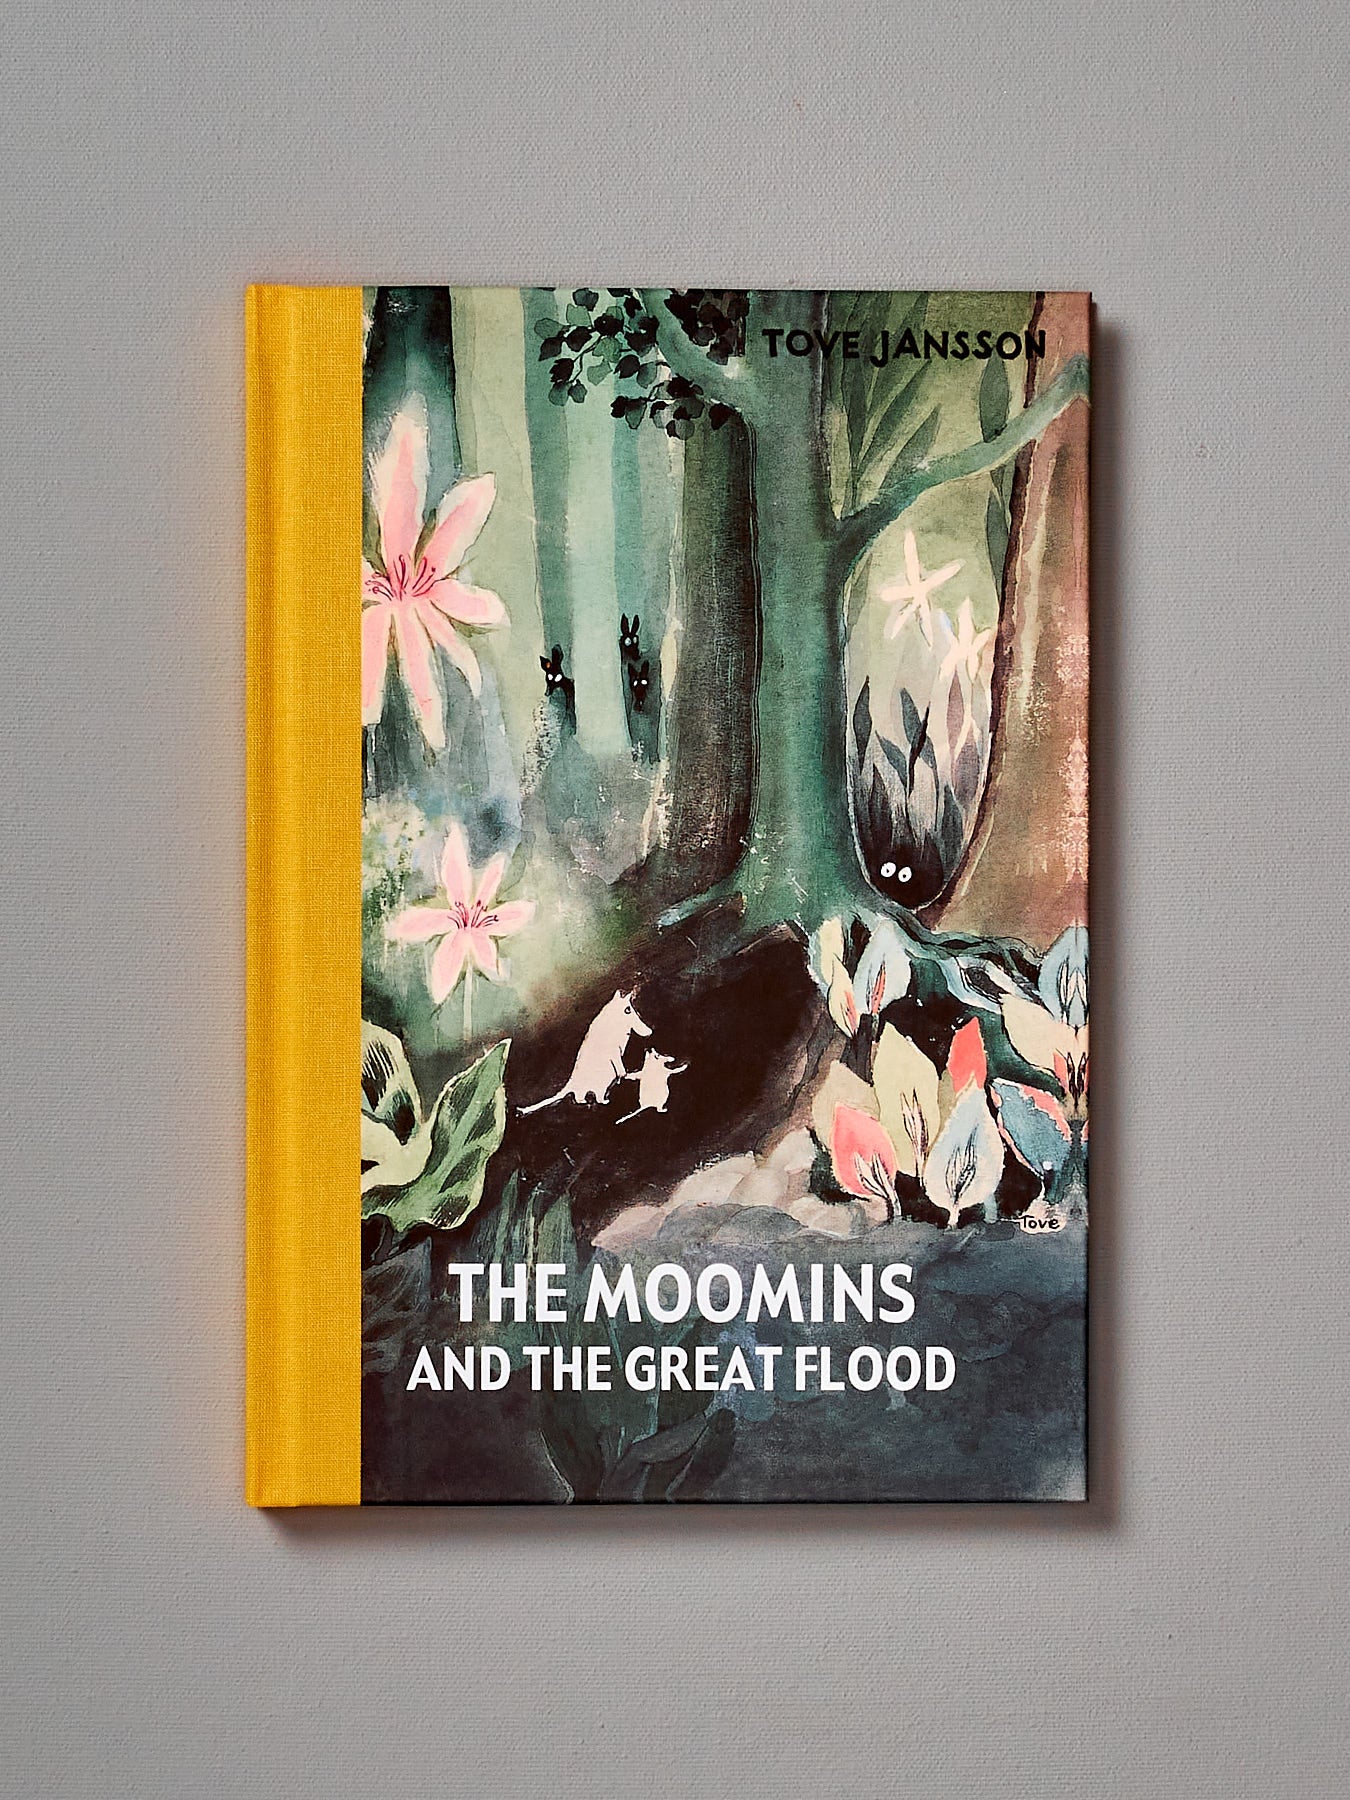 The Tove Jansson Moomins and the Great Flood.